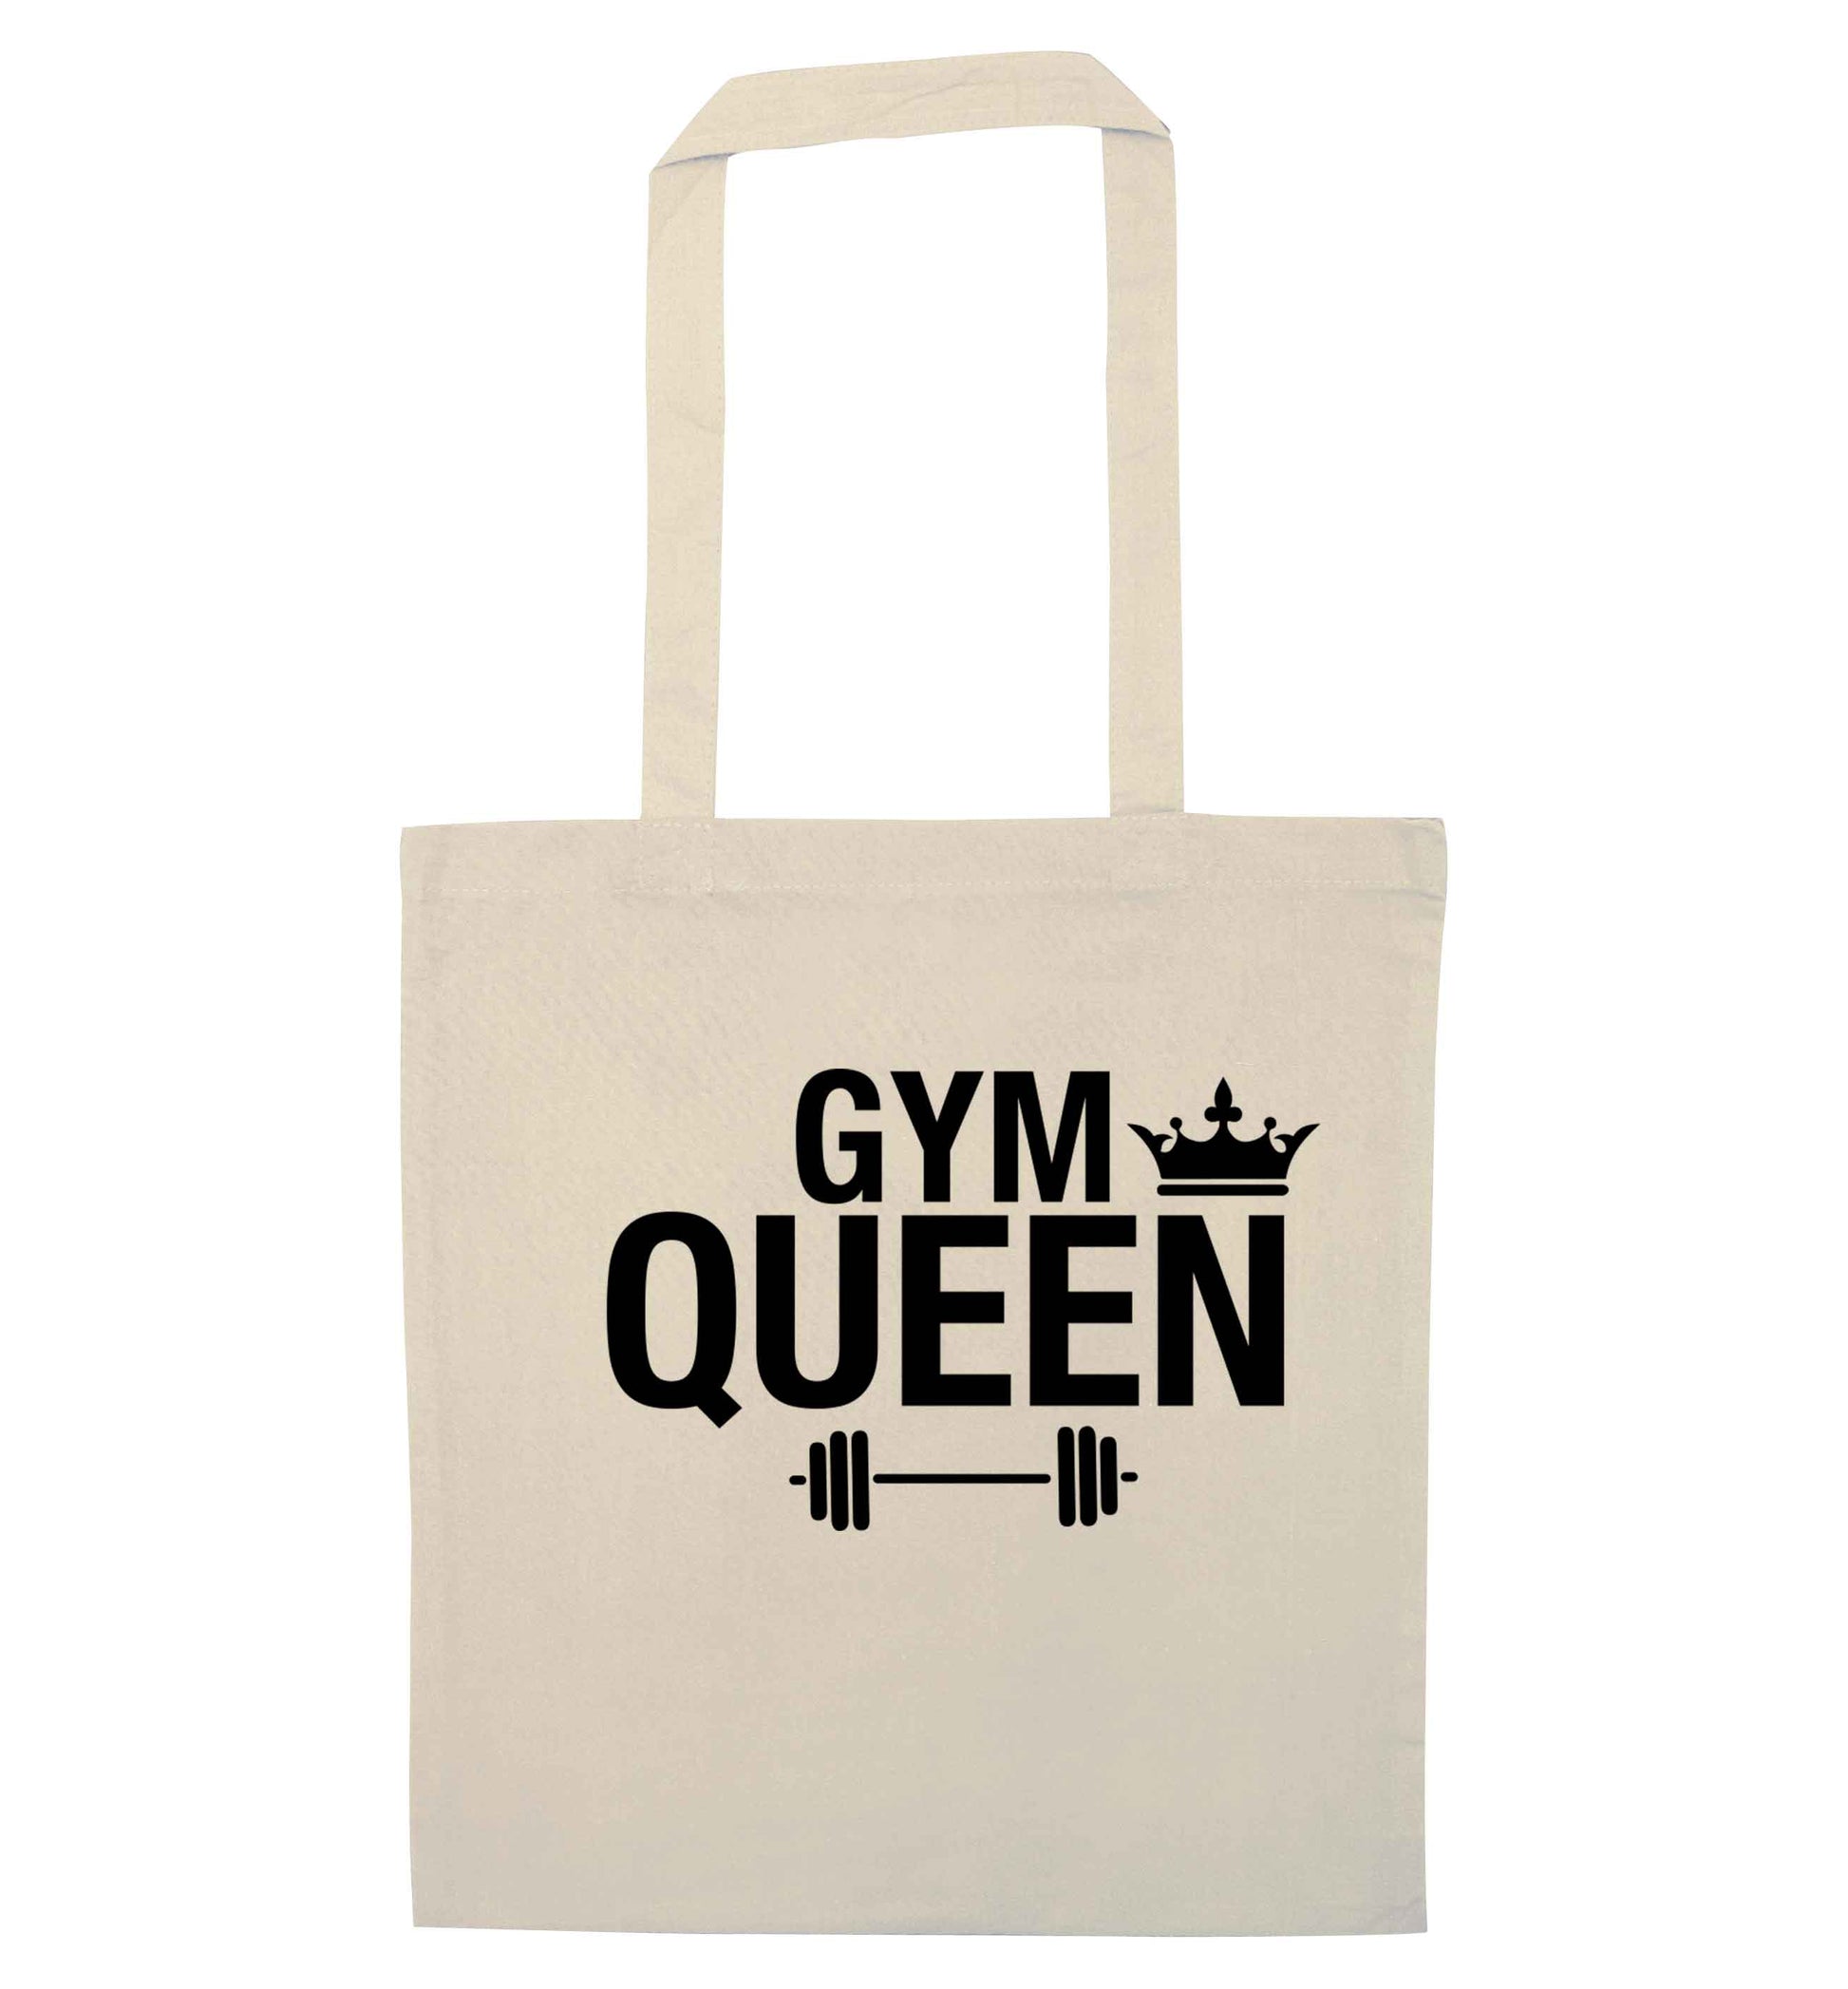 Gym queen natural tote bag